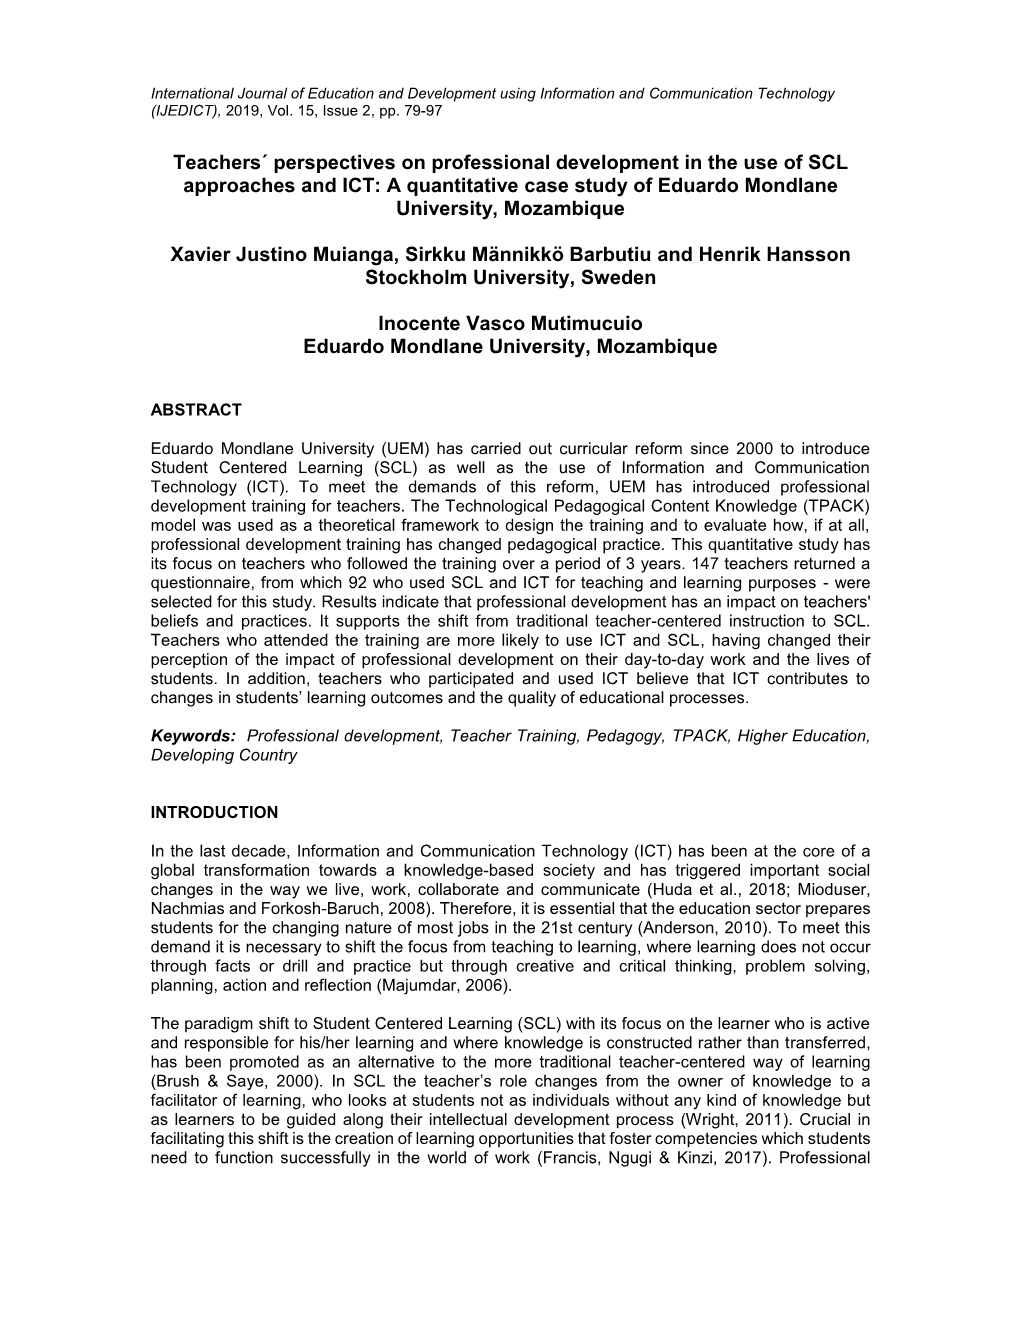 Teachers´ Perspectives on Professional Development in the Use of SCL Approaches and ICT: a Quantitative Case Study of Eduardo Mondlane University, Mozambique